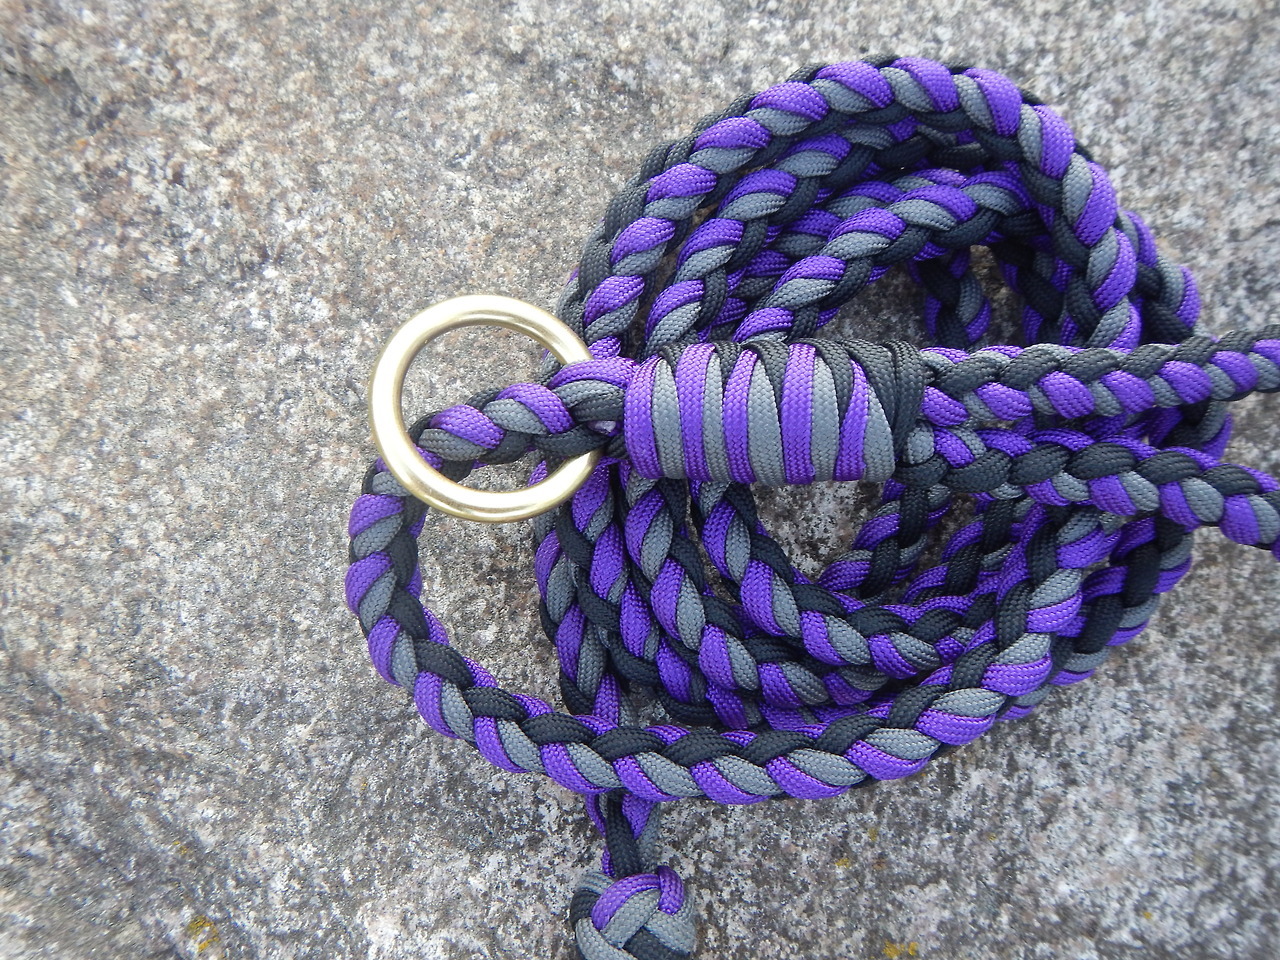 Paracreations USA — 6 Strand Modified Round braid paracord Leash in...